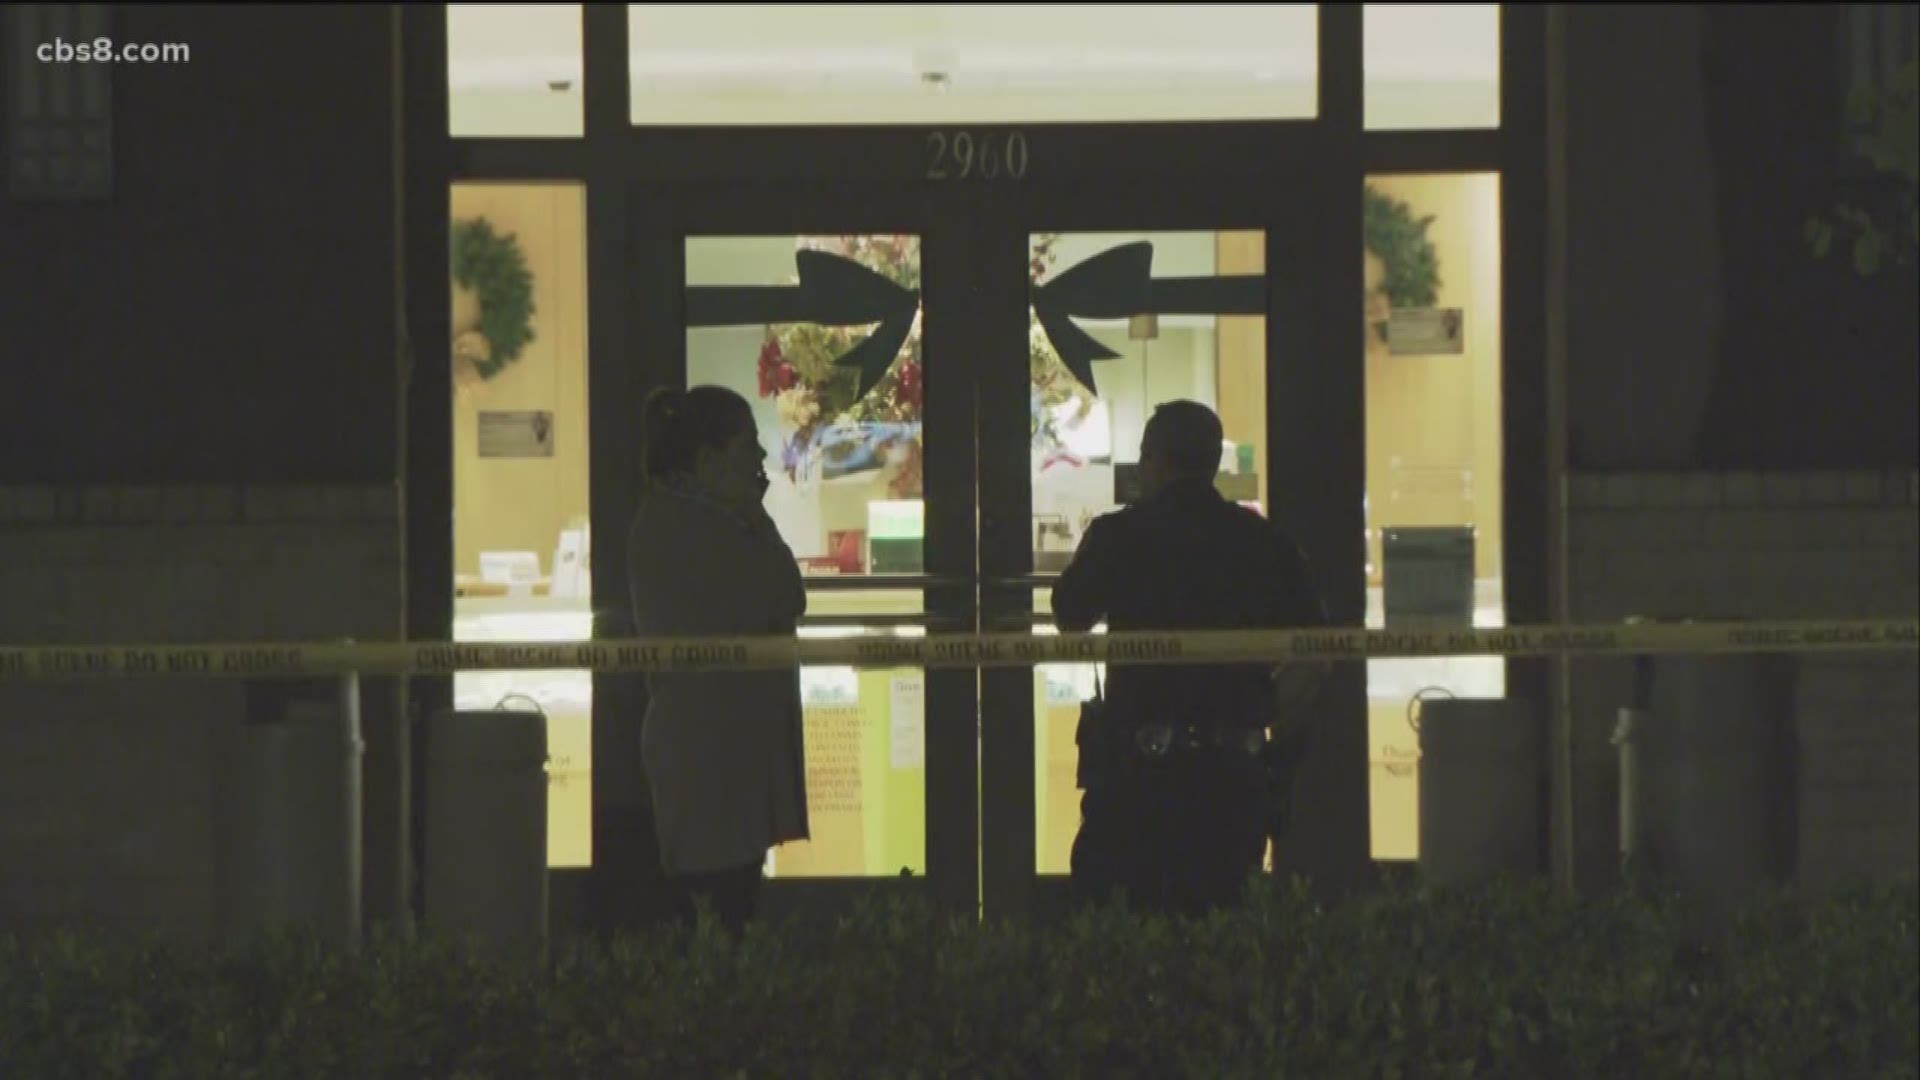 At least four masked suspects, one armed with a gun, robbed a jewelry store in National City Tuesday night.